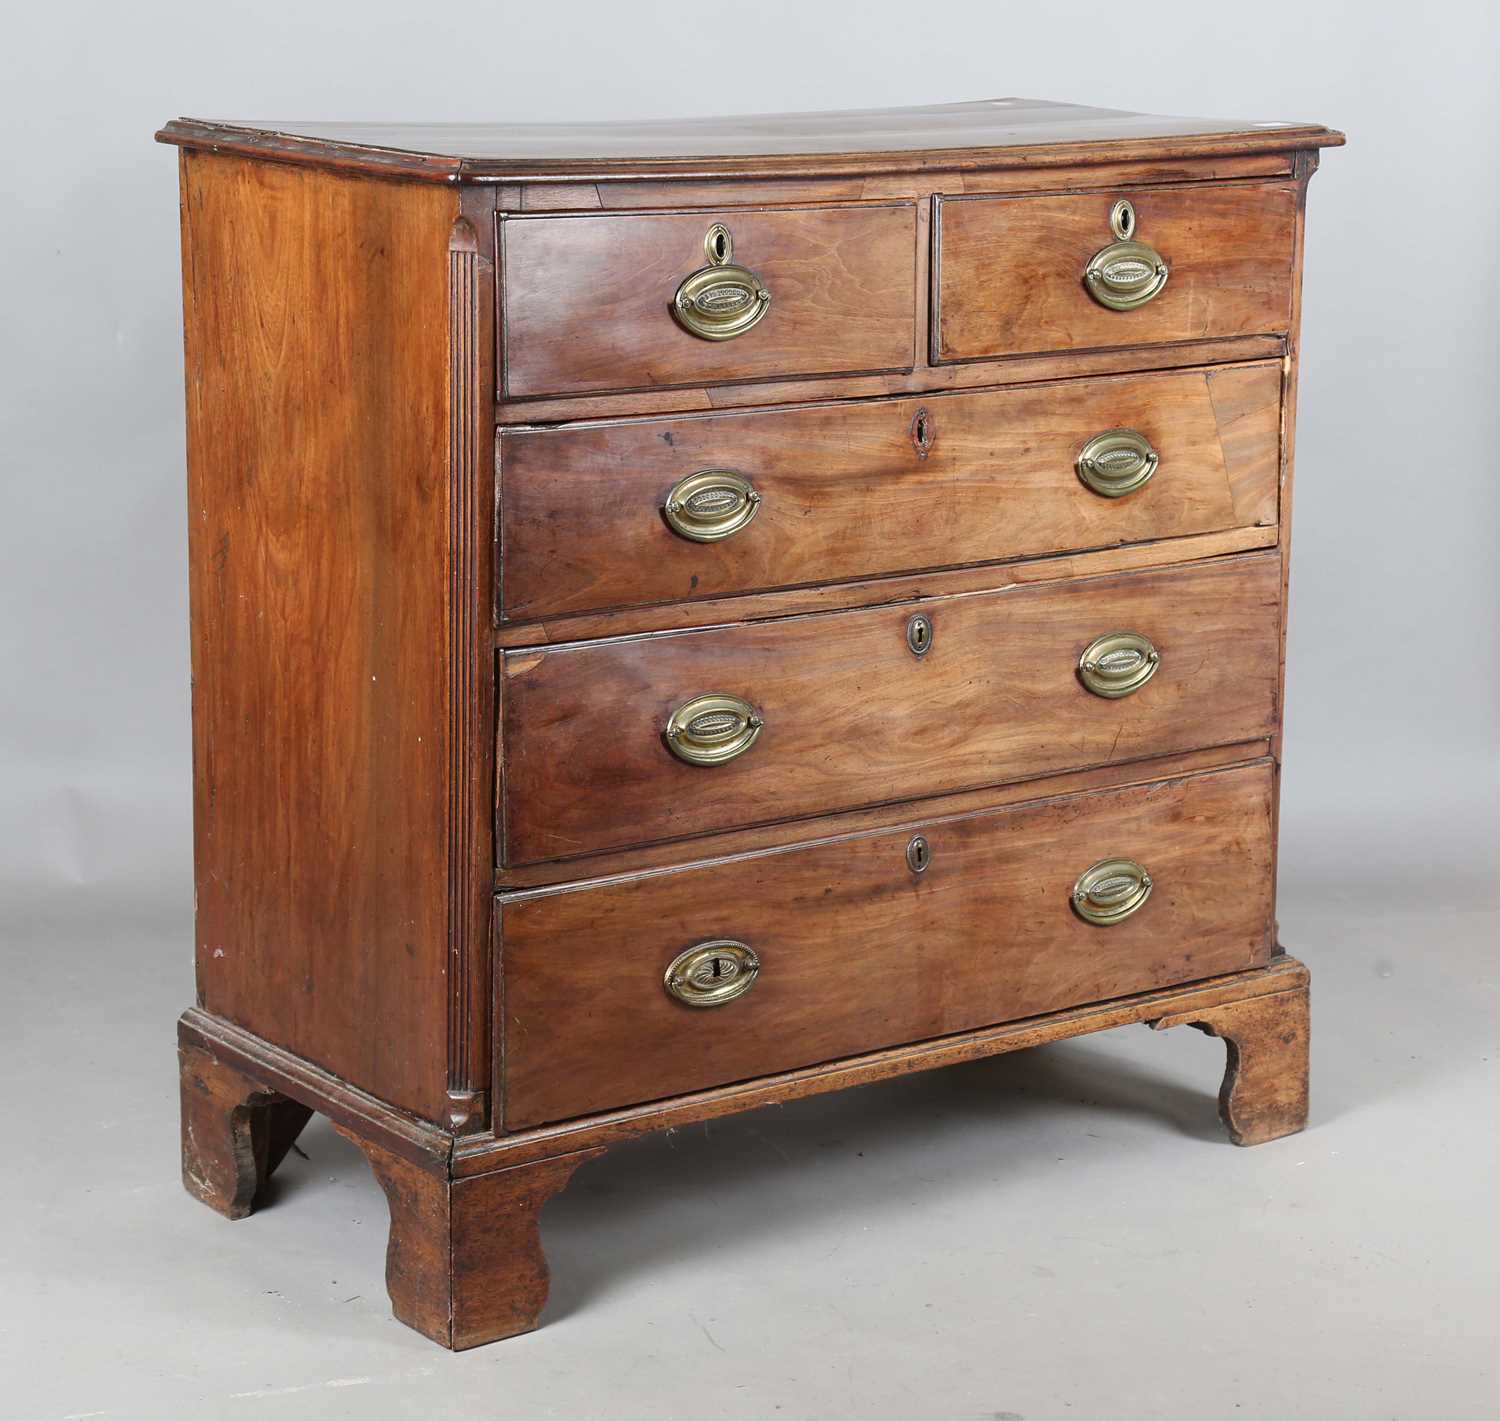 An early George III mahogany chest of oak-lined drawers, height 110cm, width 111cm, depth 51cm (